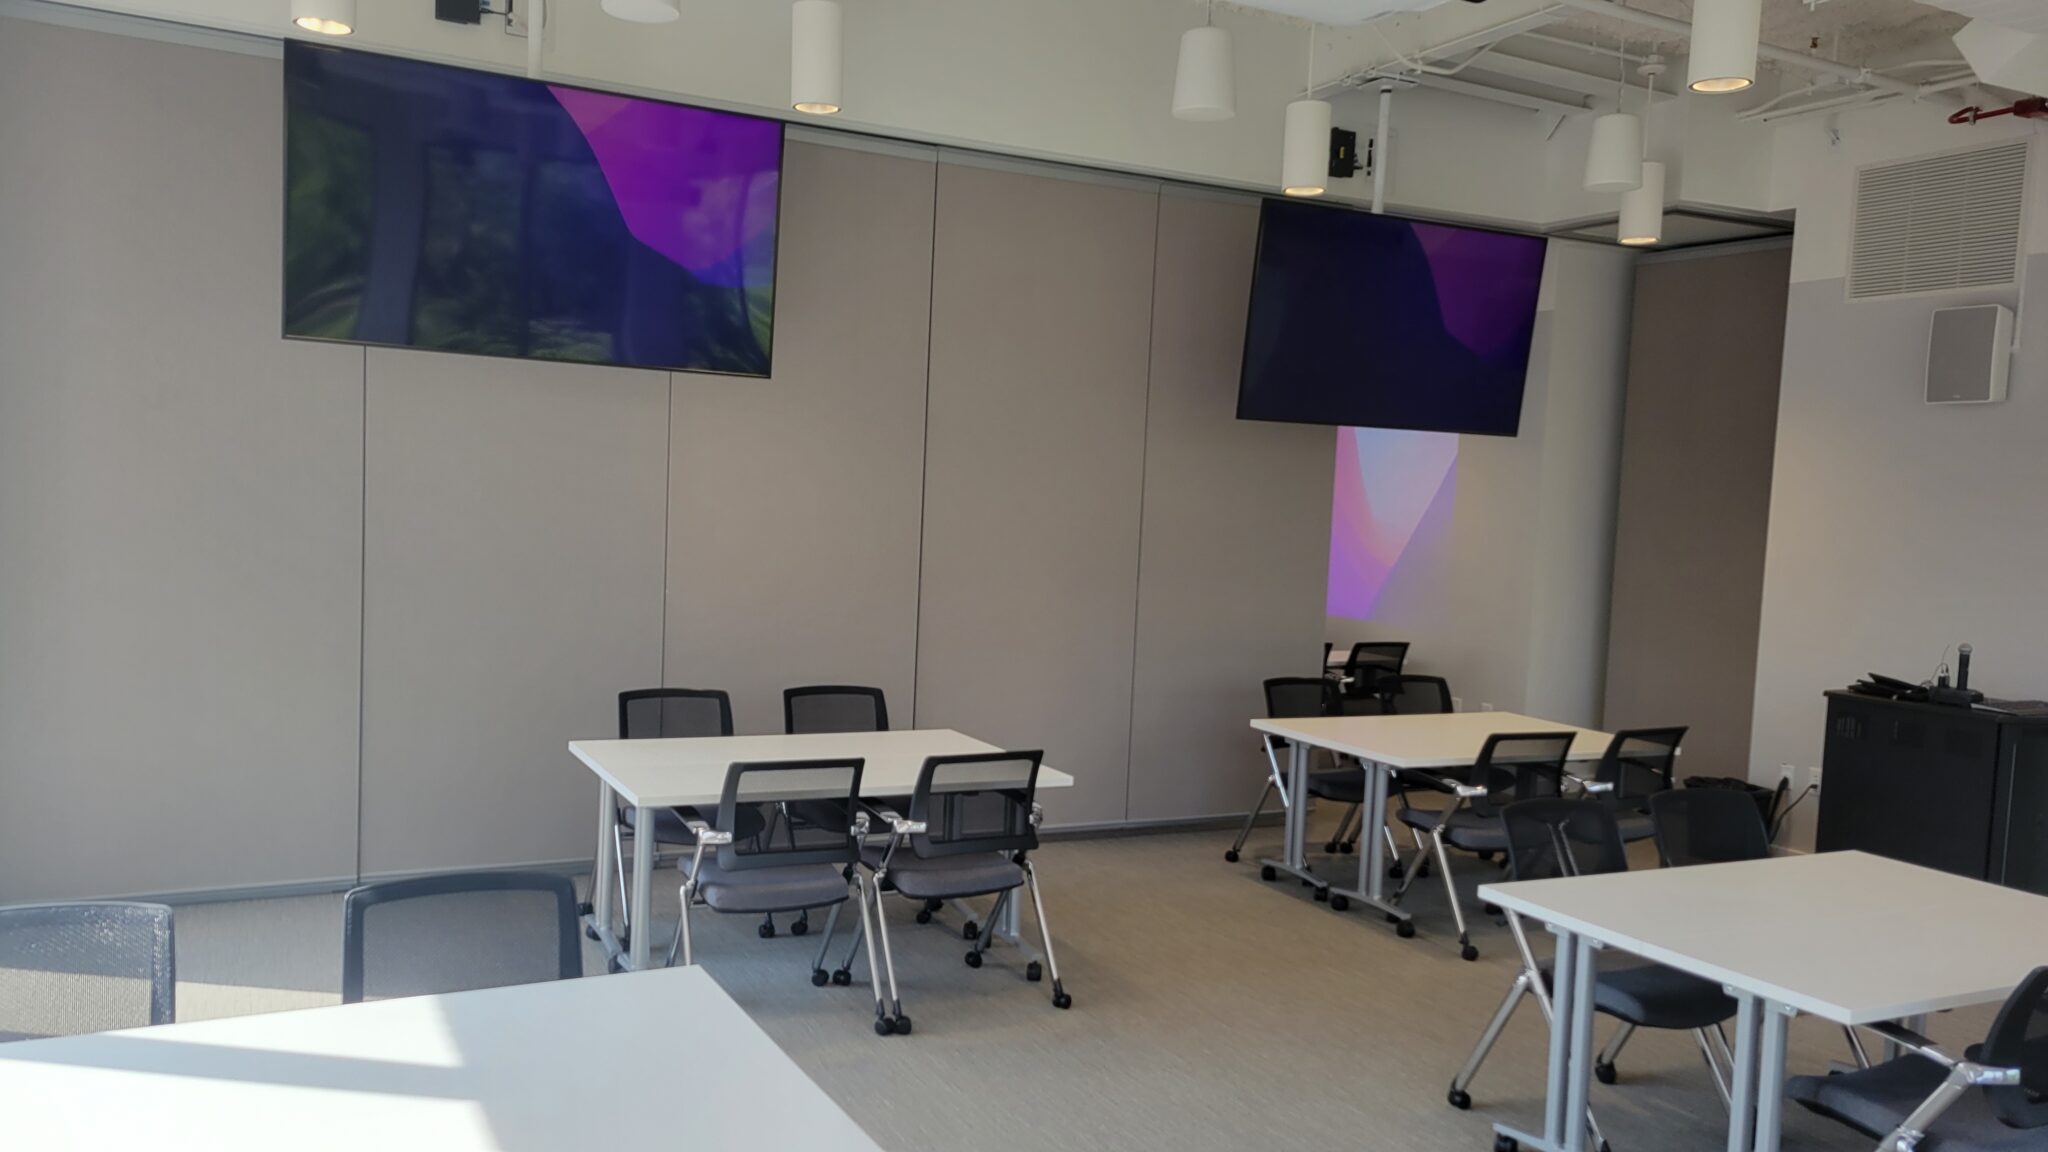 Classroom with mounted monitors and small groups of desks.